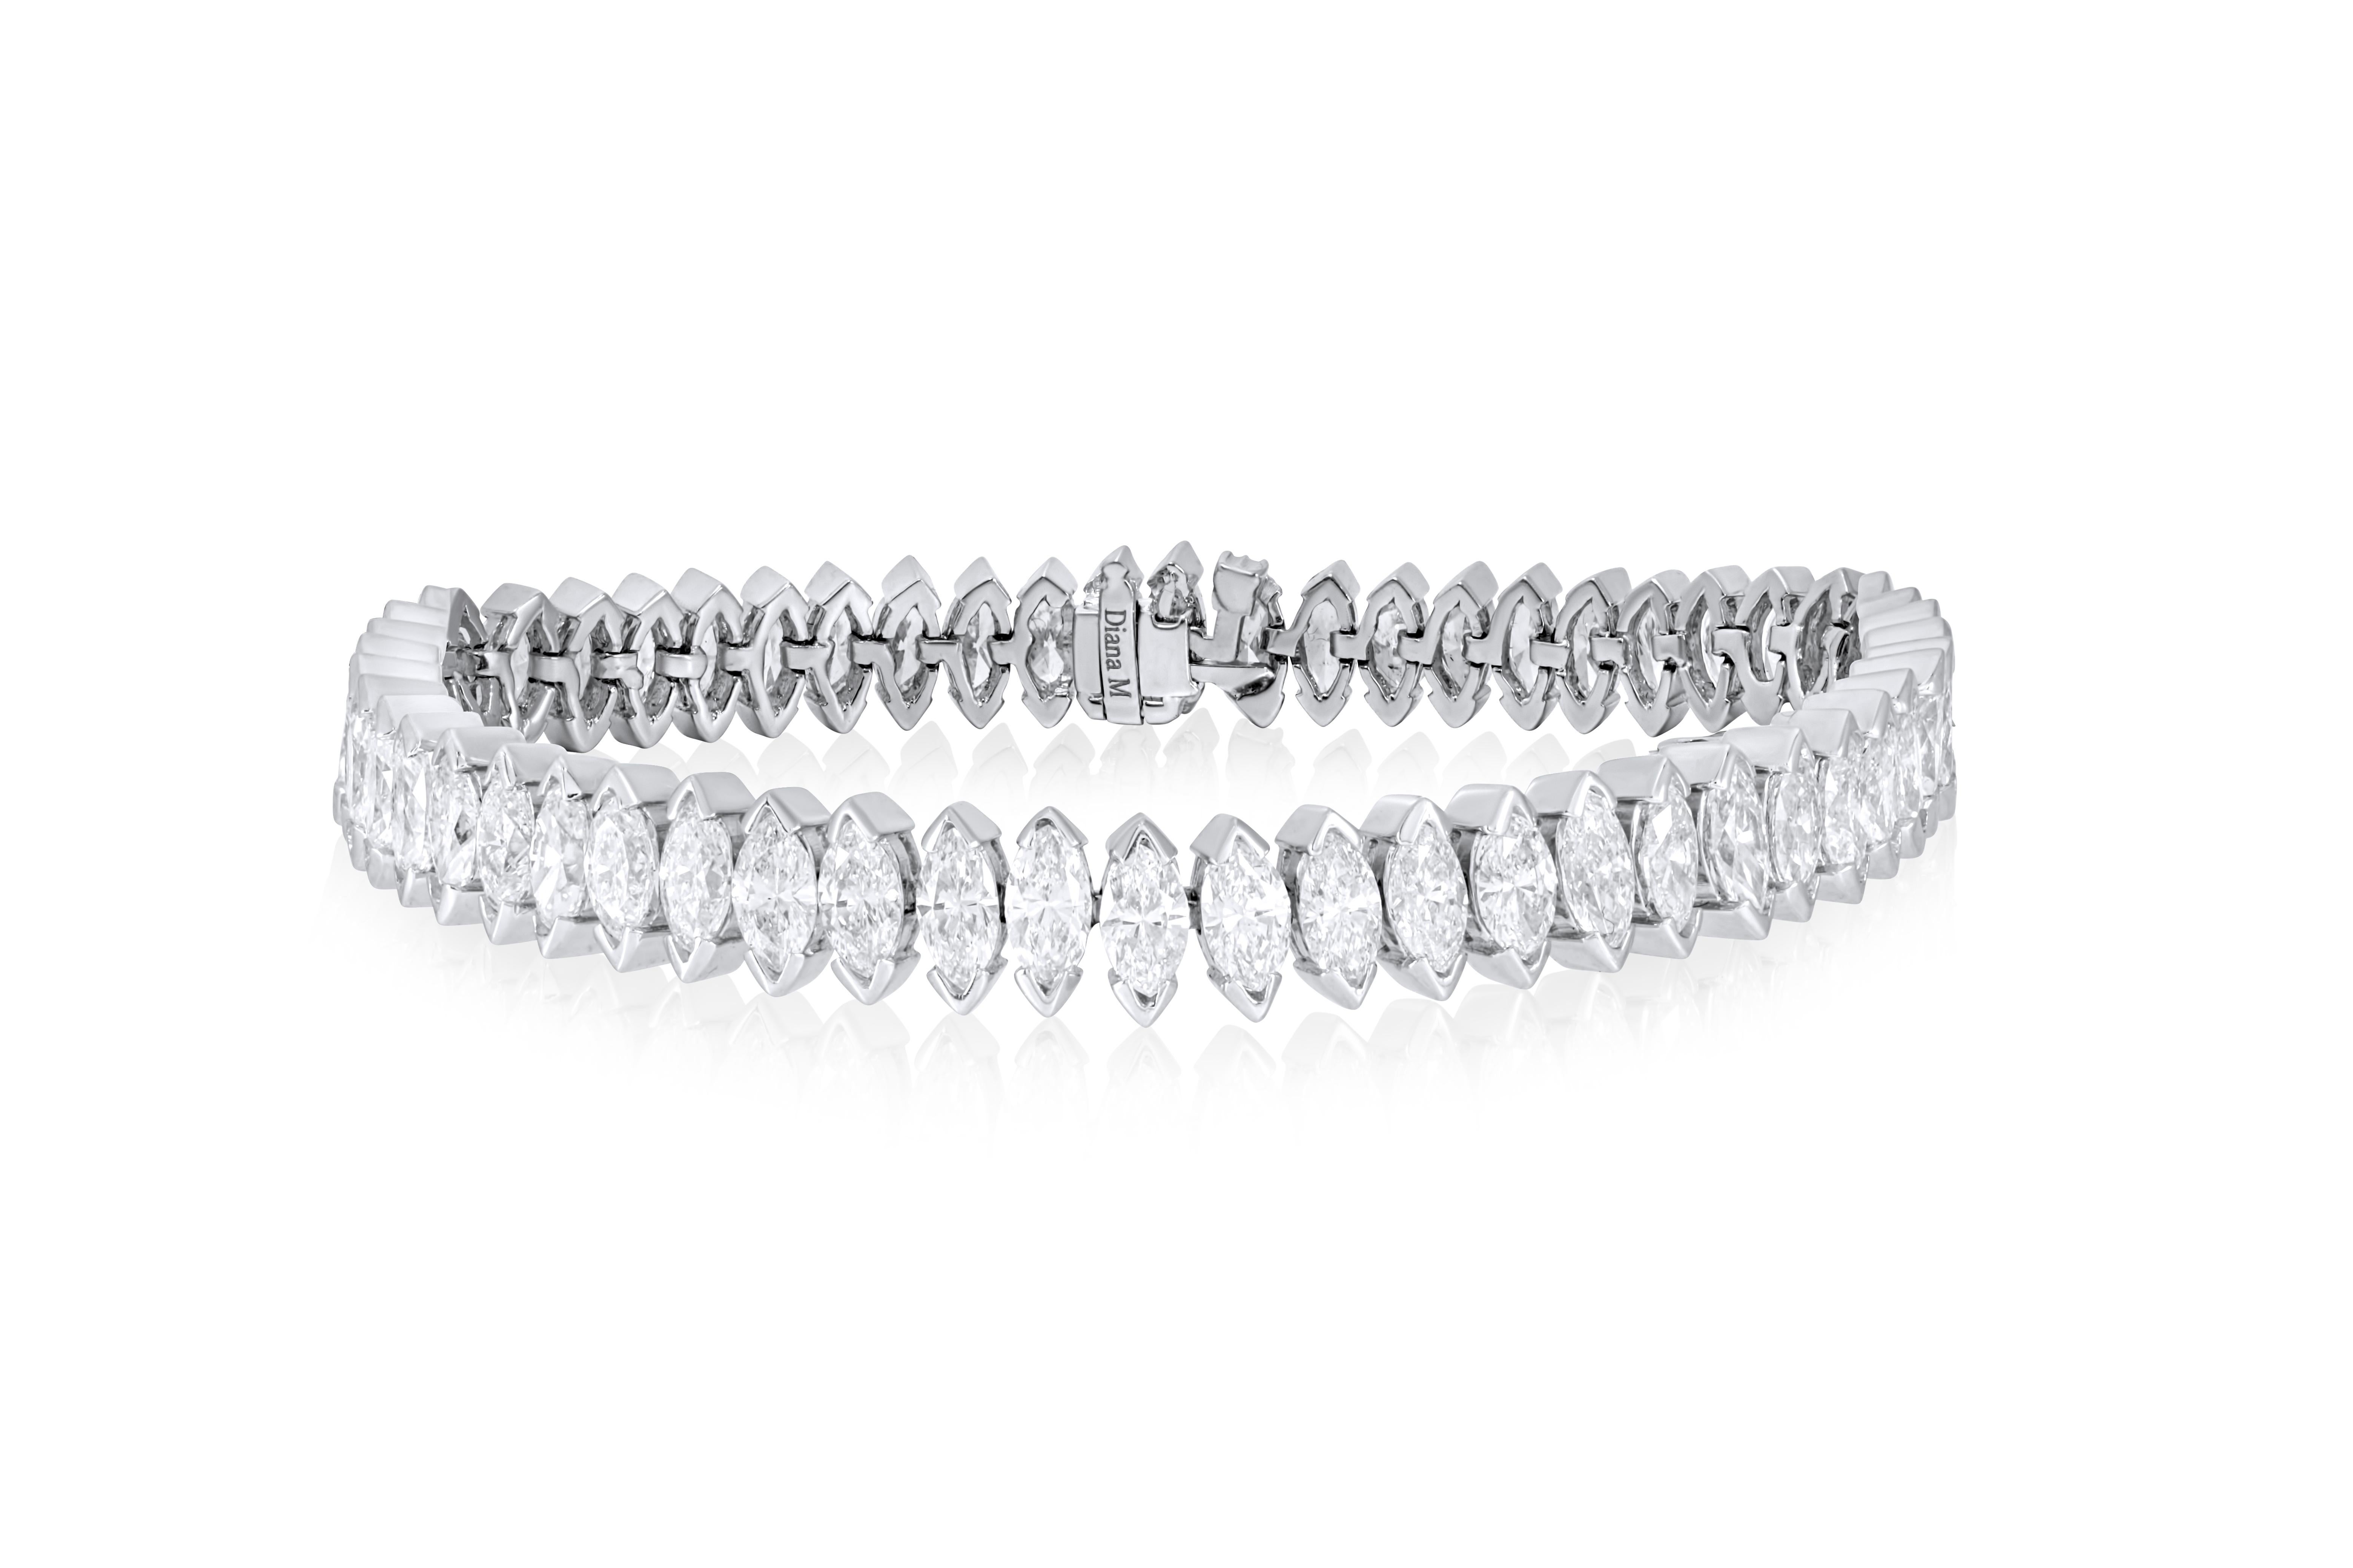 18 kt white gold diamond tennis bracelet adorned with 12.32 cts tw of marquise cut diamonds (56 stones)
Diana M. is a leading supplier of top-quality fine jewelry for over 35 years.
Diana M is one-stop shop for all your jewelry shopping, carrying